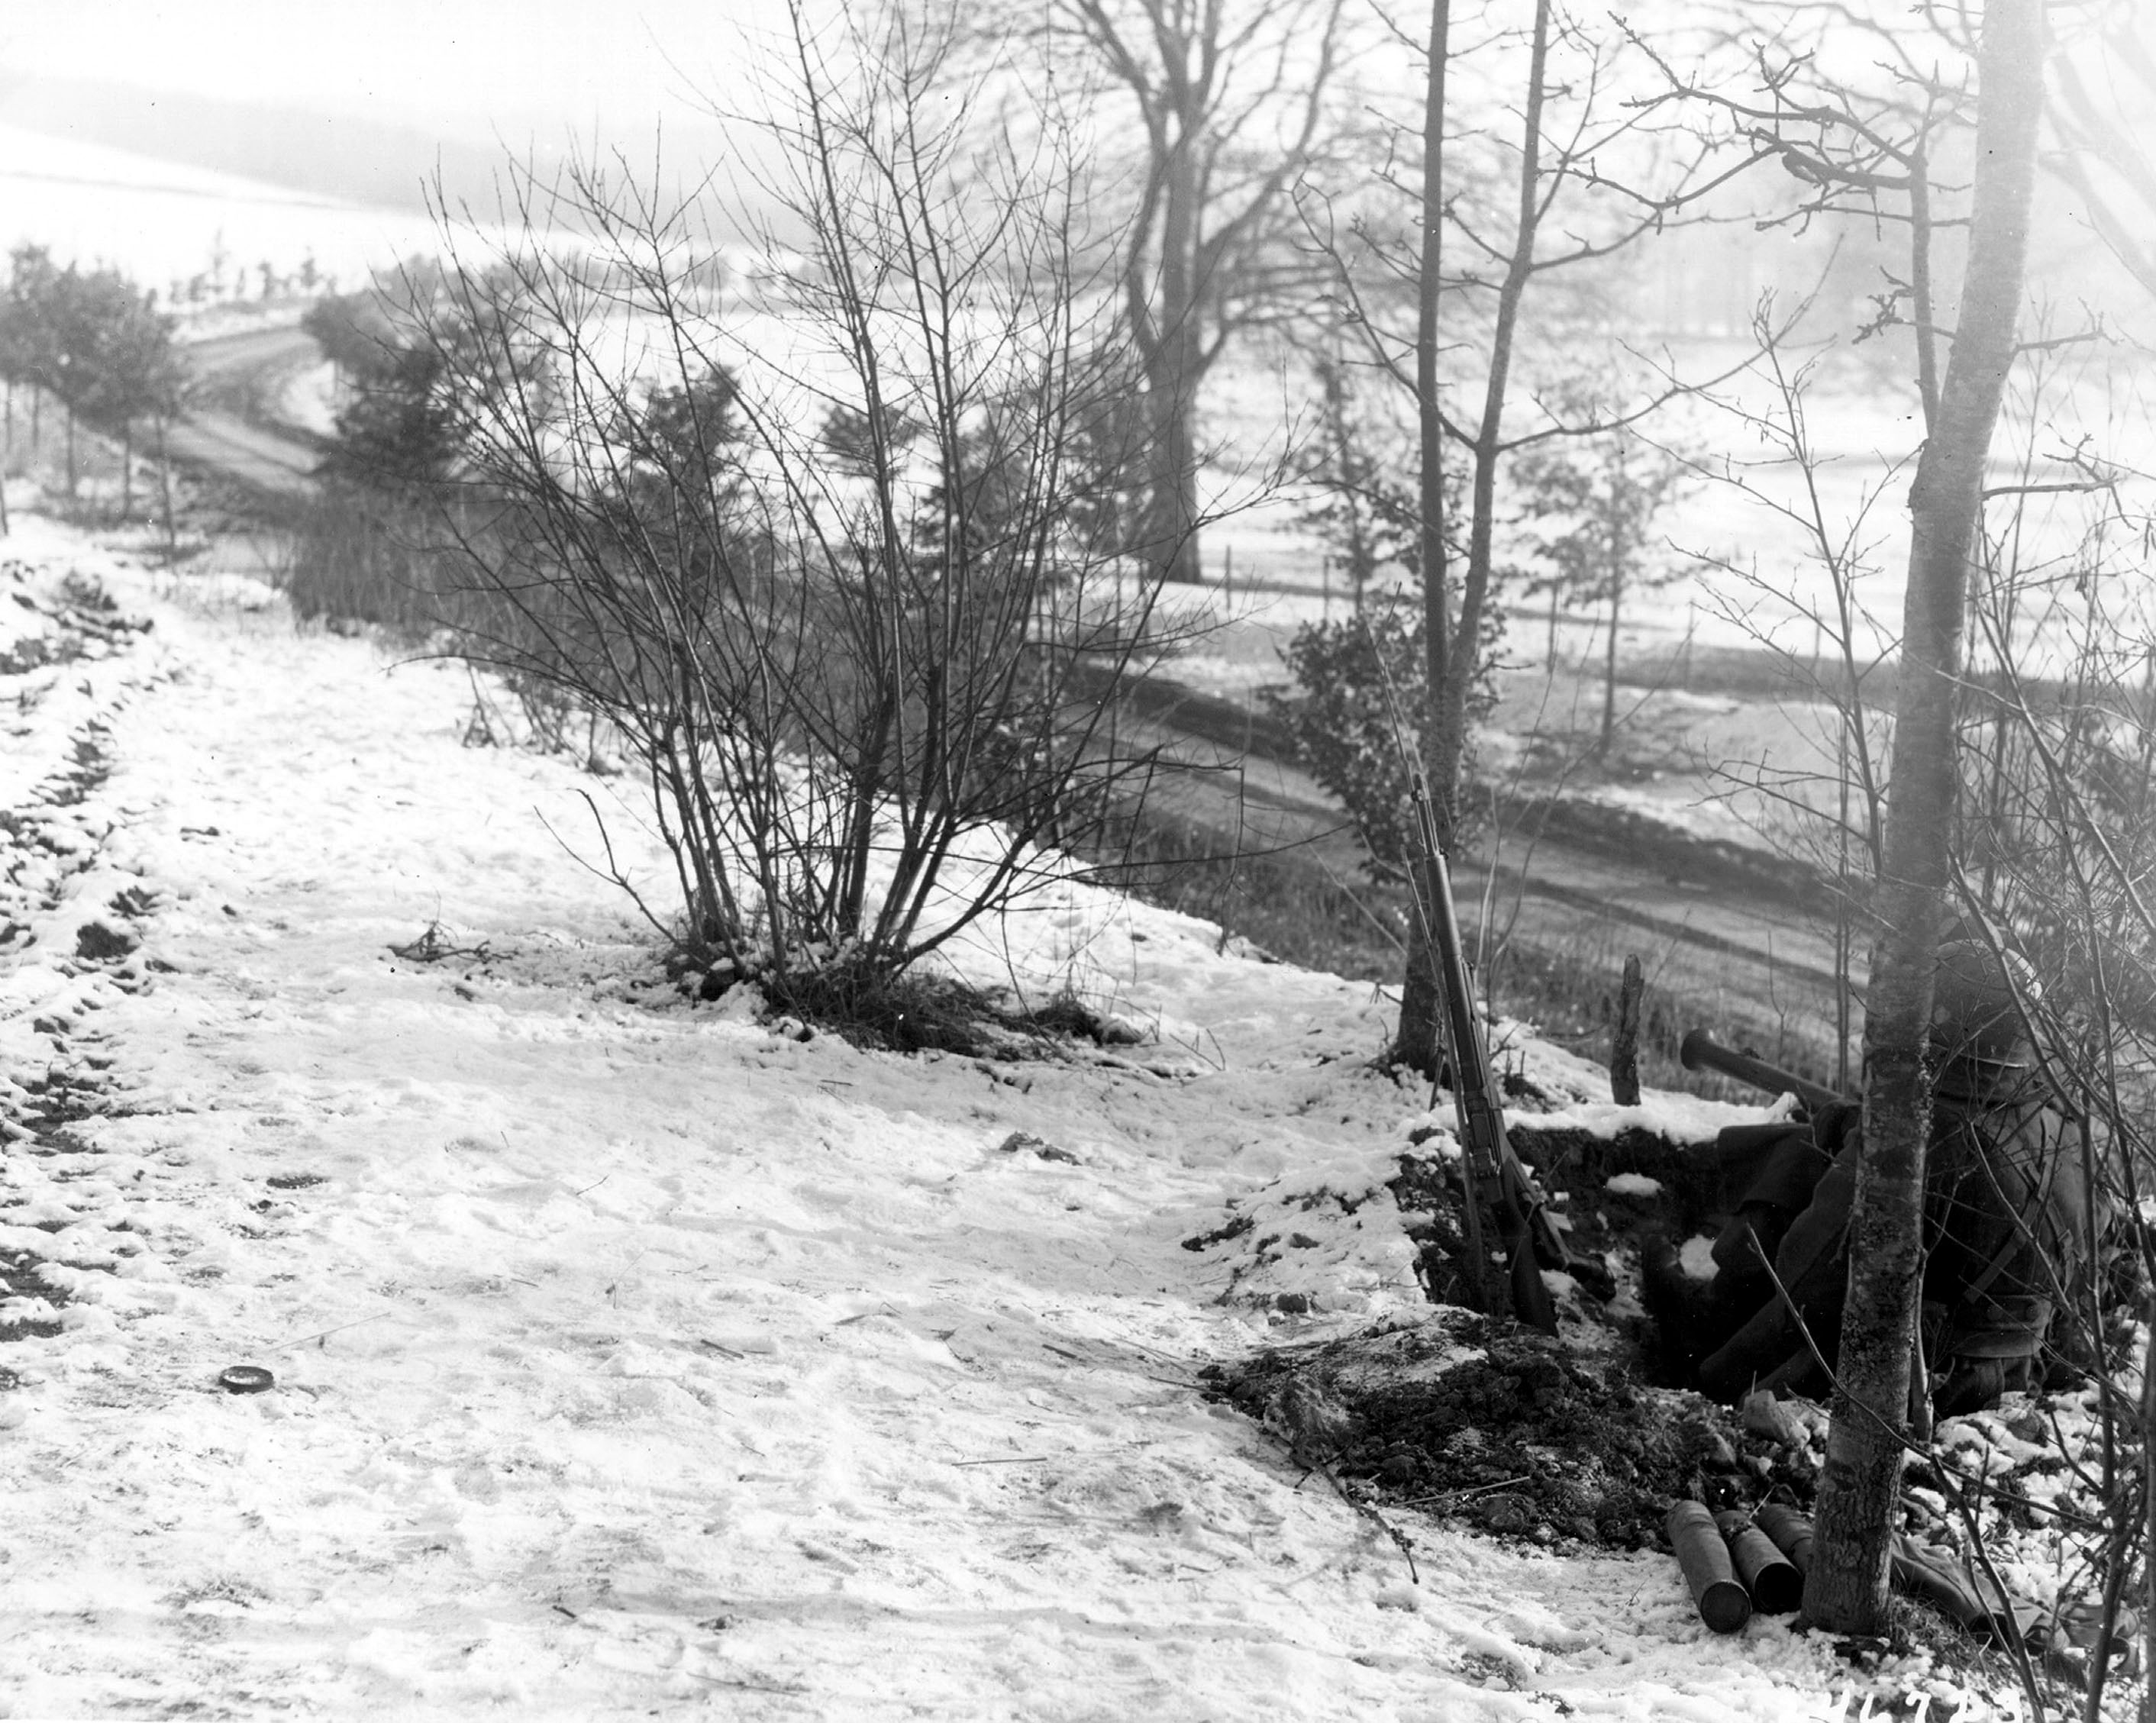 Two soldiers of US 101st Airborne Division with bazookas guard road leading to Bastogne, Belgium, 23 Dec 1944 (US Army Center of Military History)